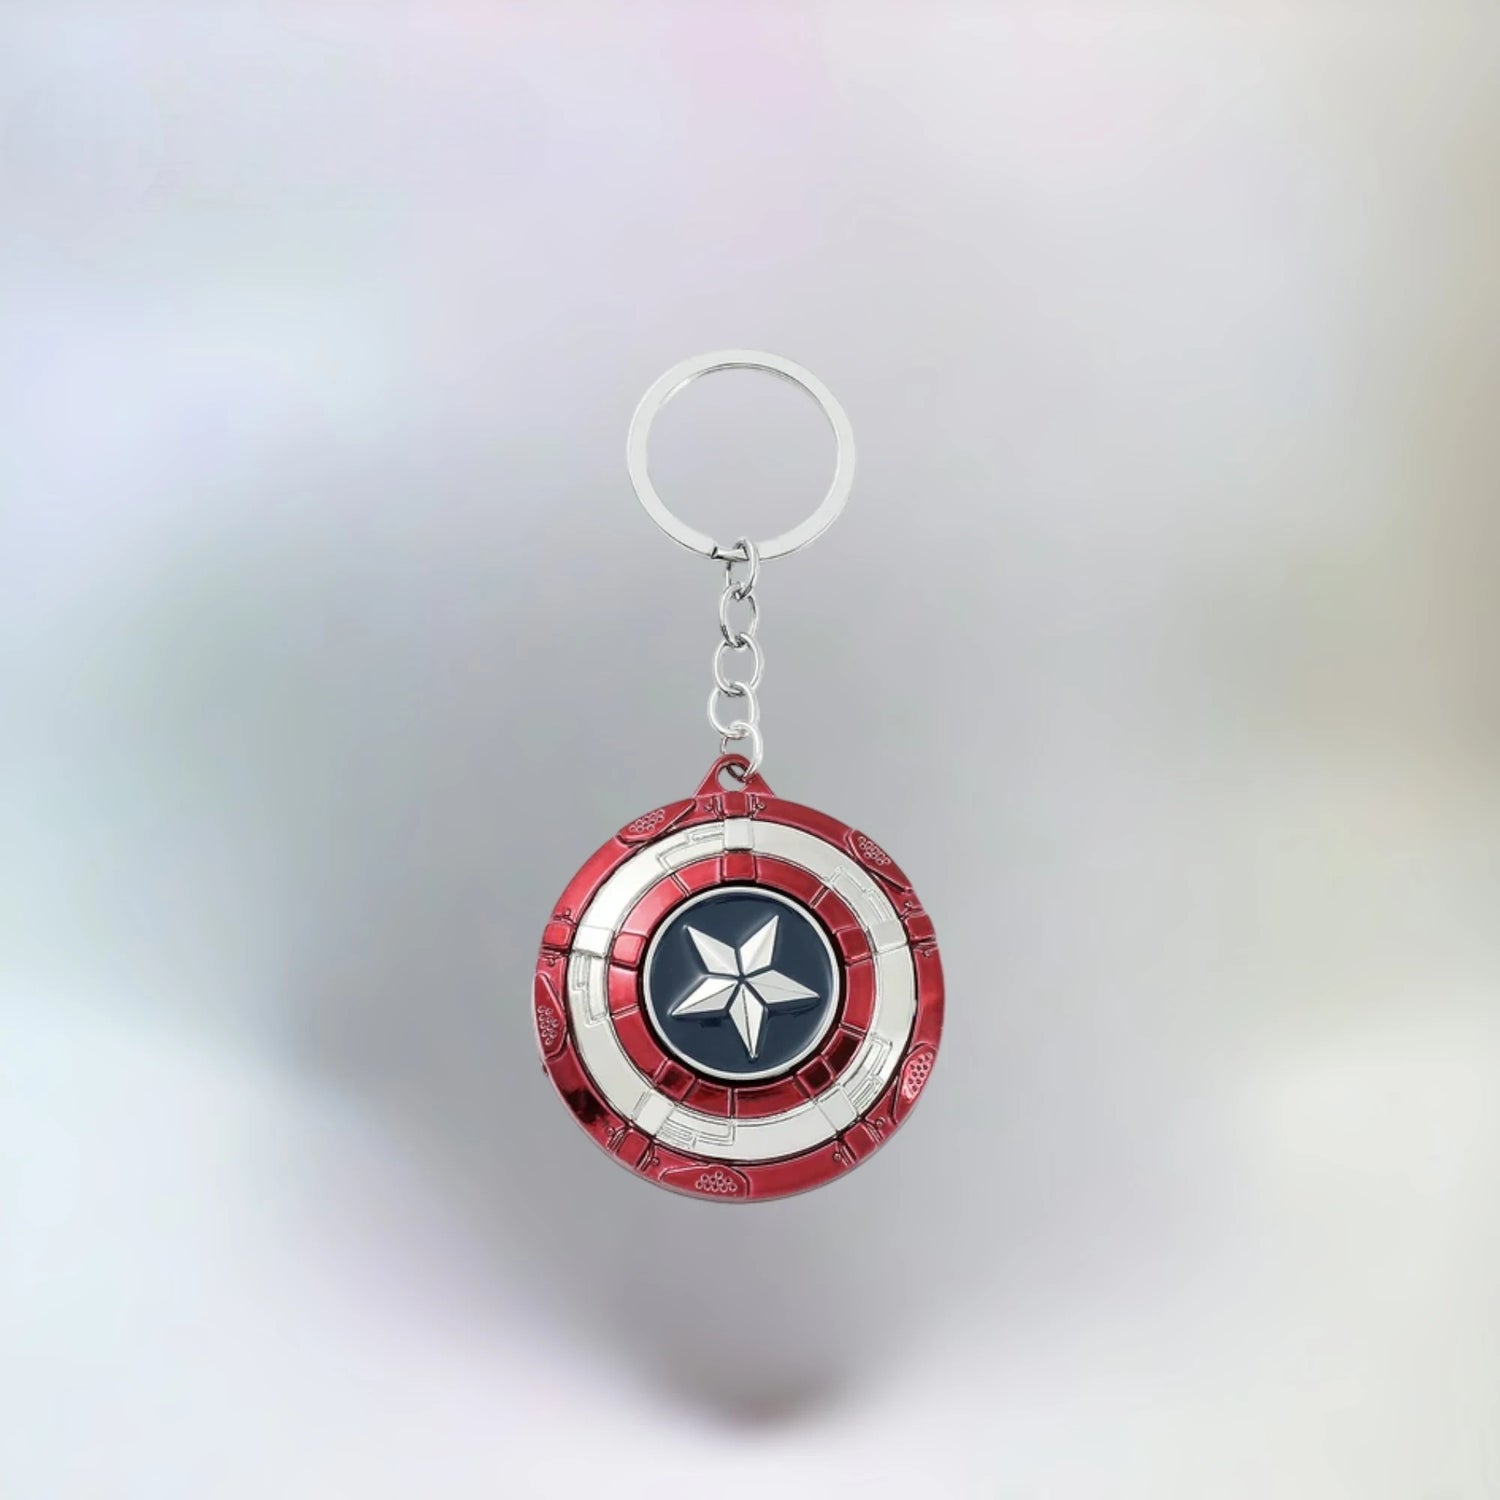 Captain America shield keyring on a plain white background, part of the Accessories collection